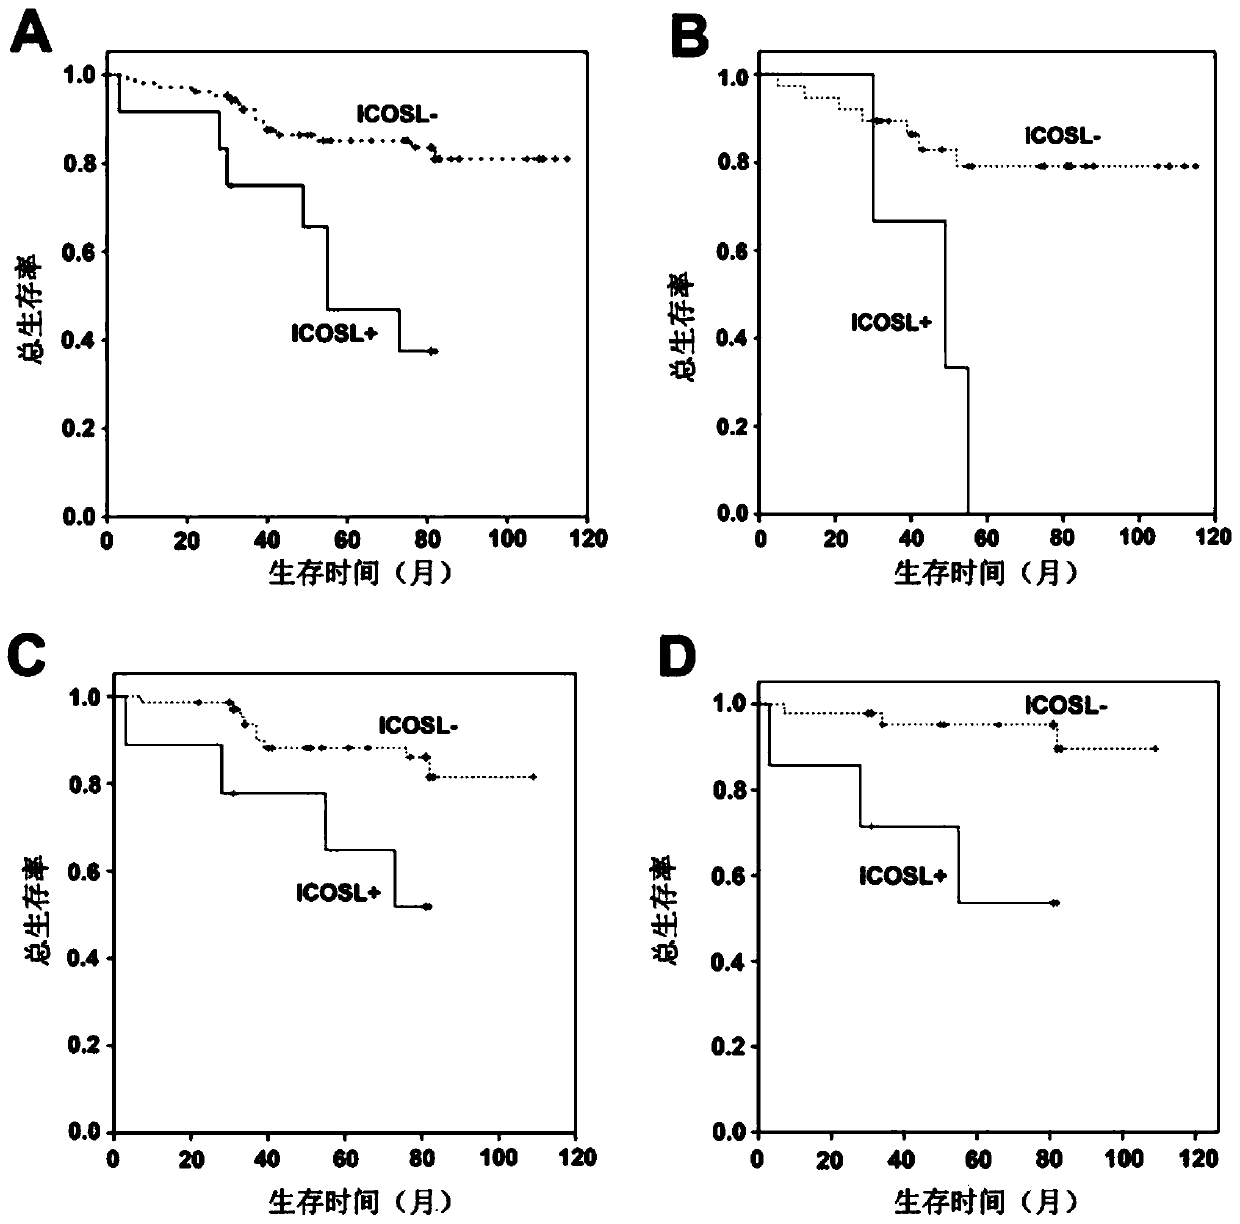 Application of ICOSL protein in preparation of kit used for breast cancer prognosis evaluation